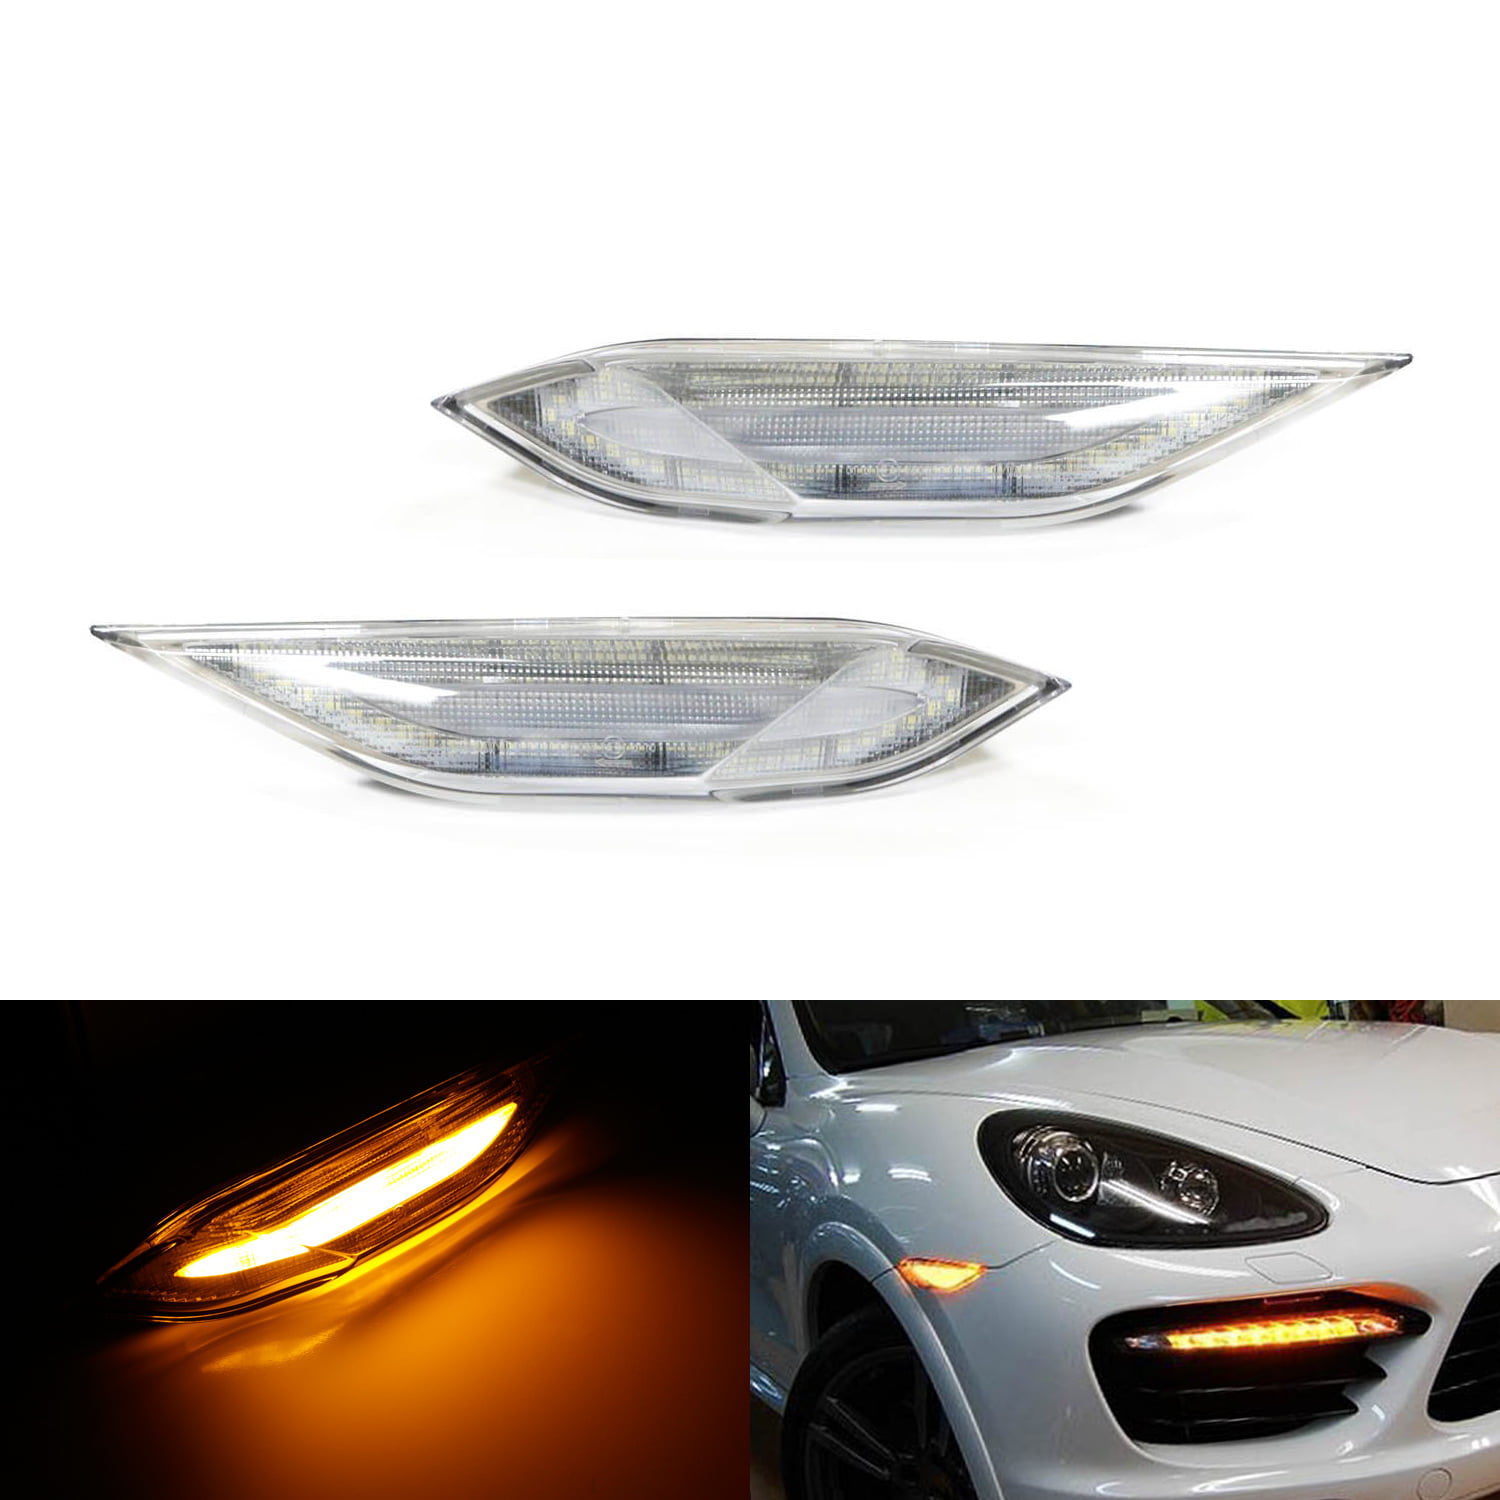 iJDMTOY Clear Lens Amber Full LED Front Side Marker Light Kit Compatible With 2011-14 Pre-LCI Porsche Cayenne Replace OEM Sidemarker Lamps Powered by SMD LED 